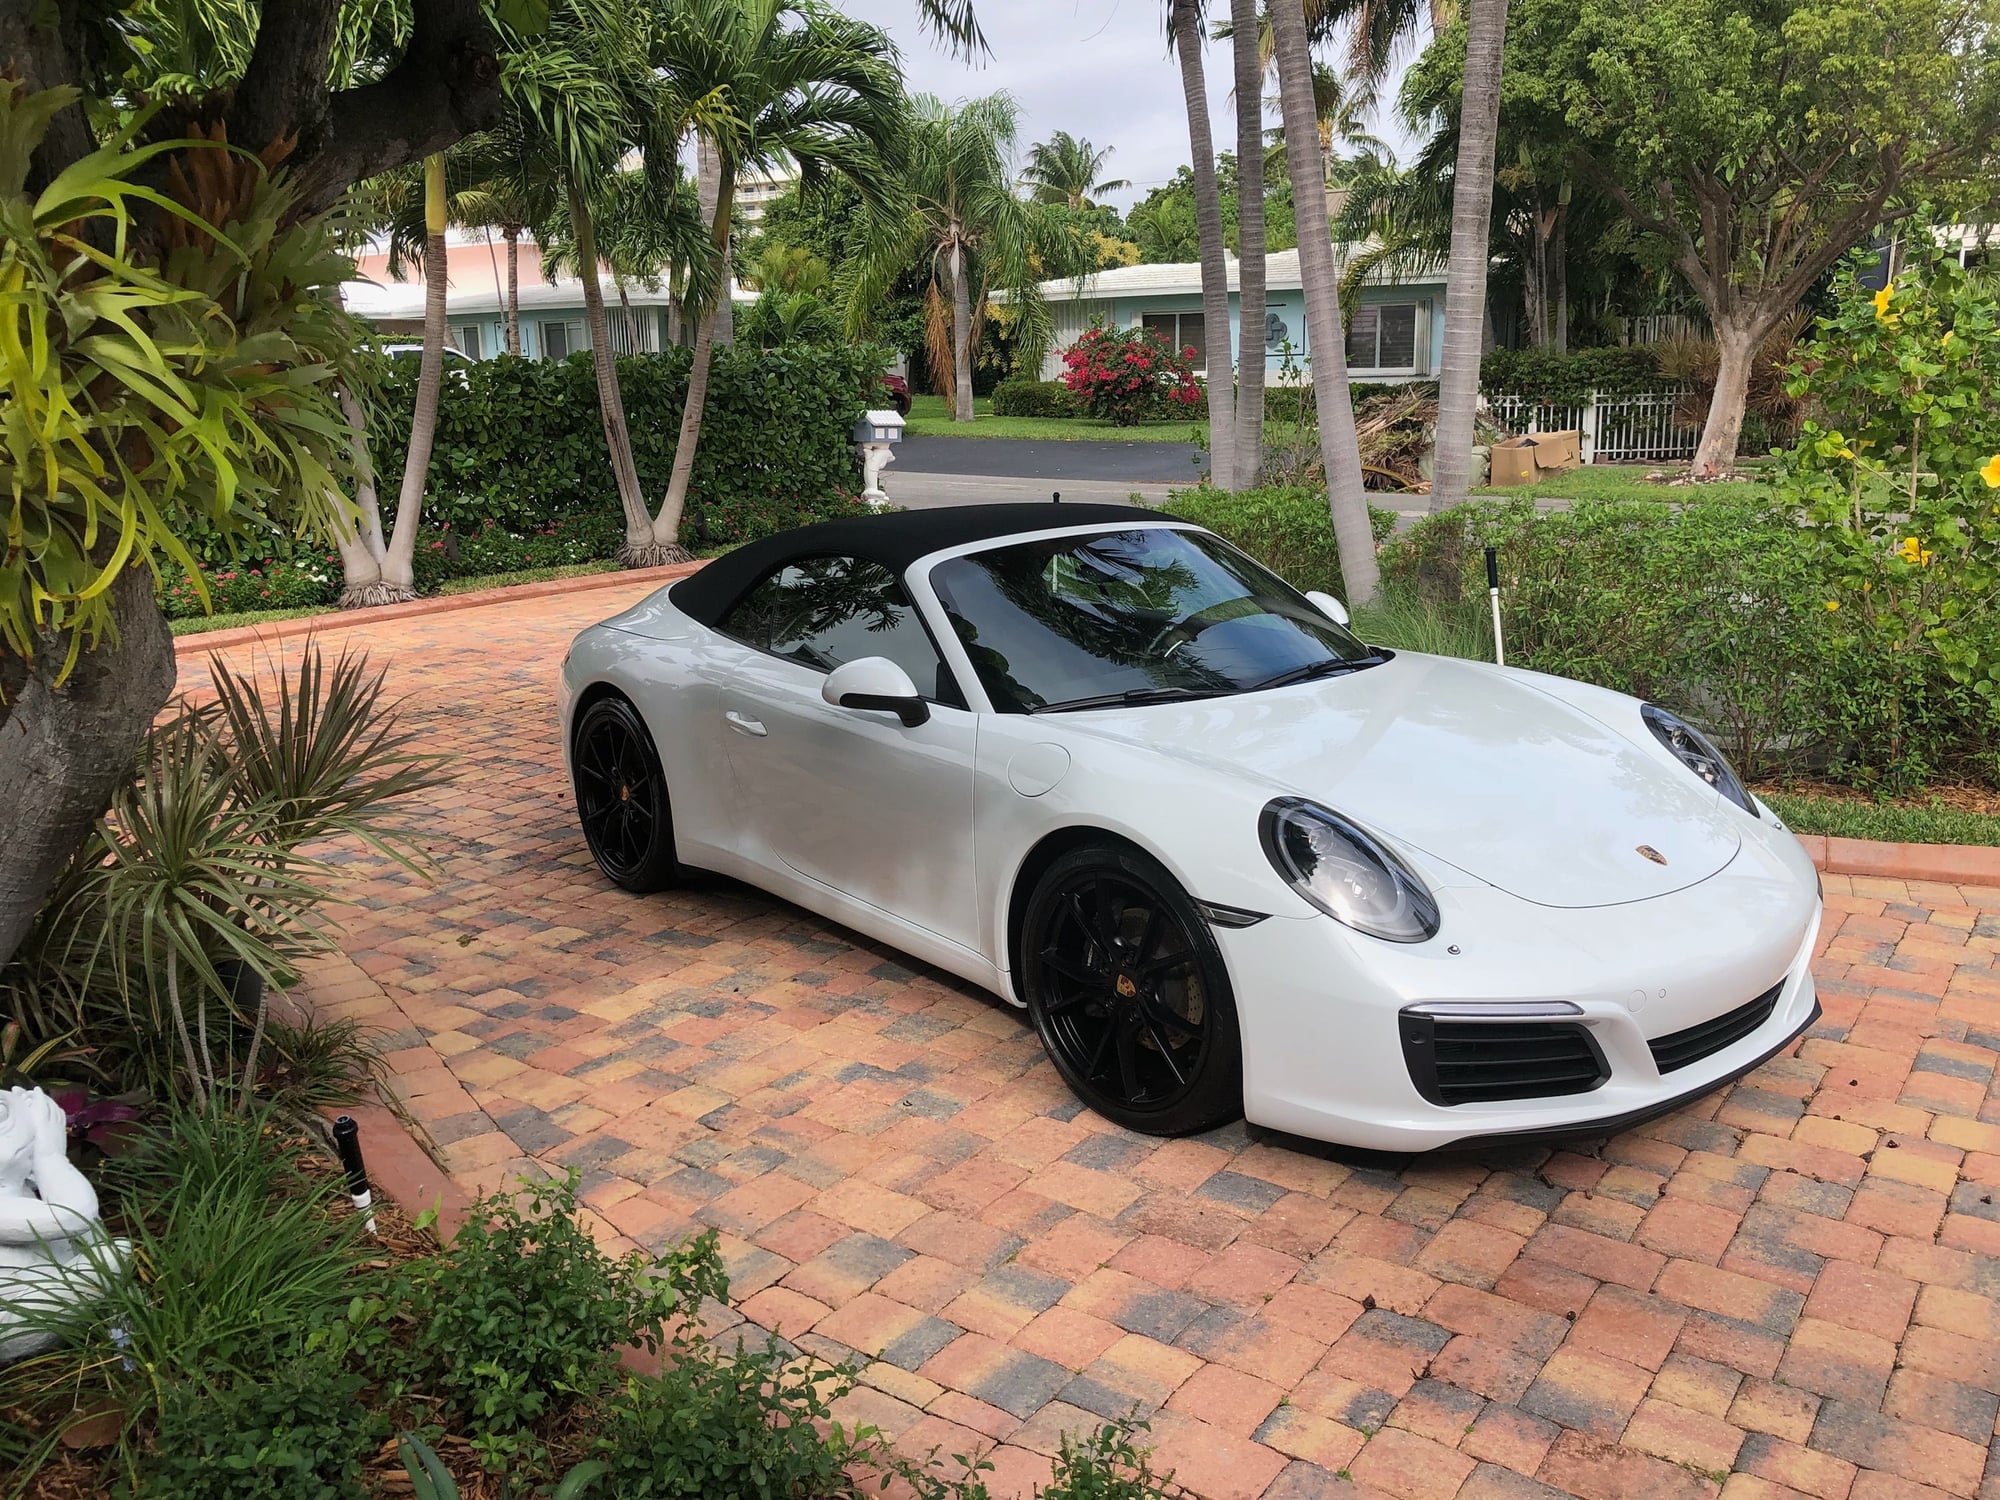 2017 Porsche 911 - 2017 911 Carrera Cabriolet - Used - VIN WP0CA2A92HS142675 - Automatic - Convertible - White - Fort Lauderdale, FL 33308, United States